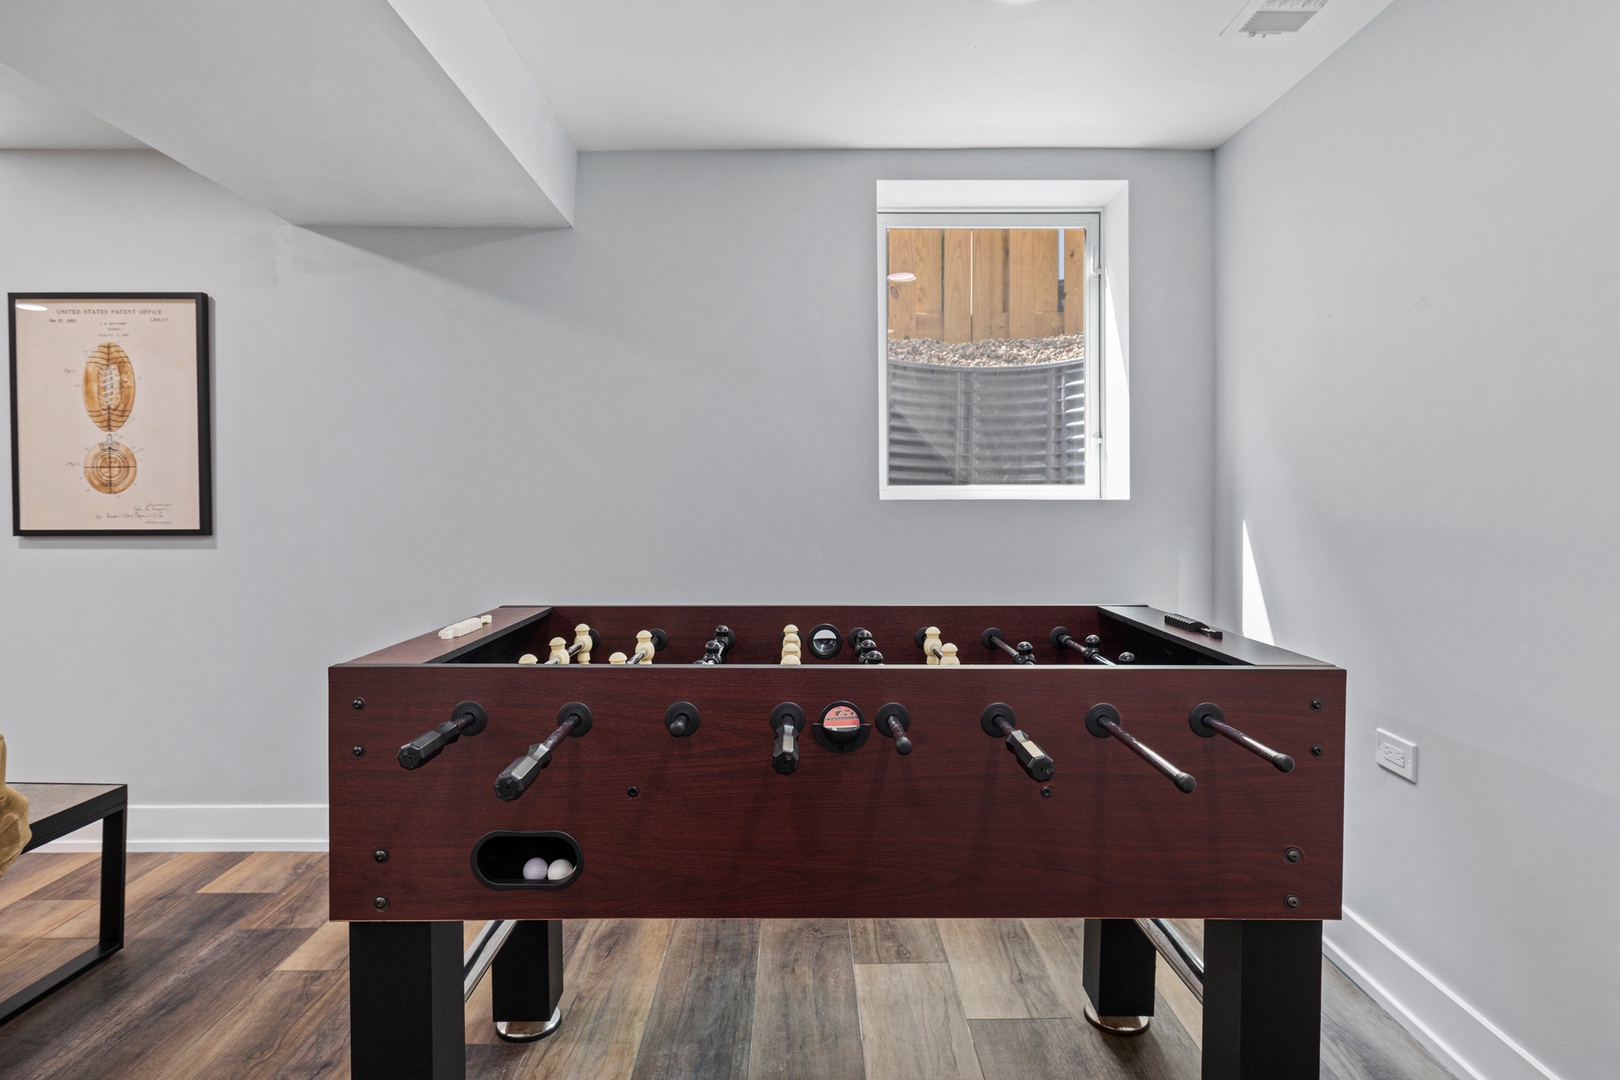 Have tons of fun with the basement Foosball table.